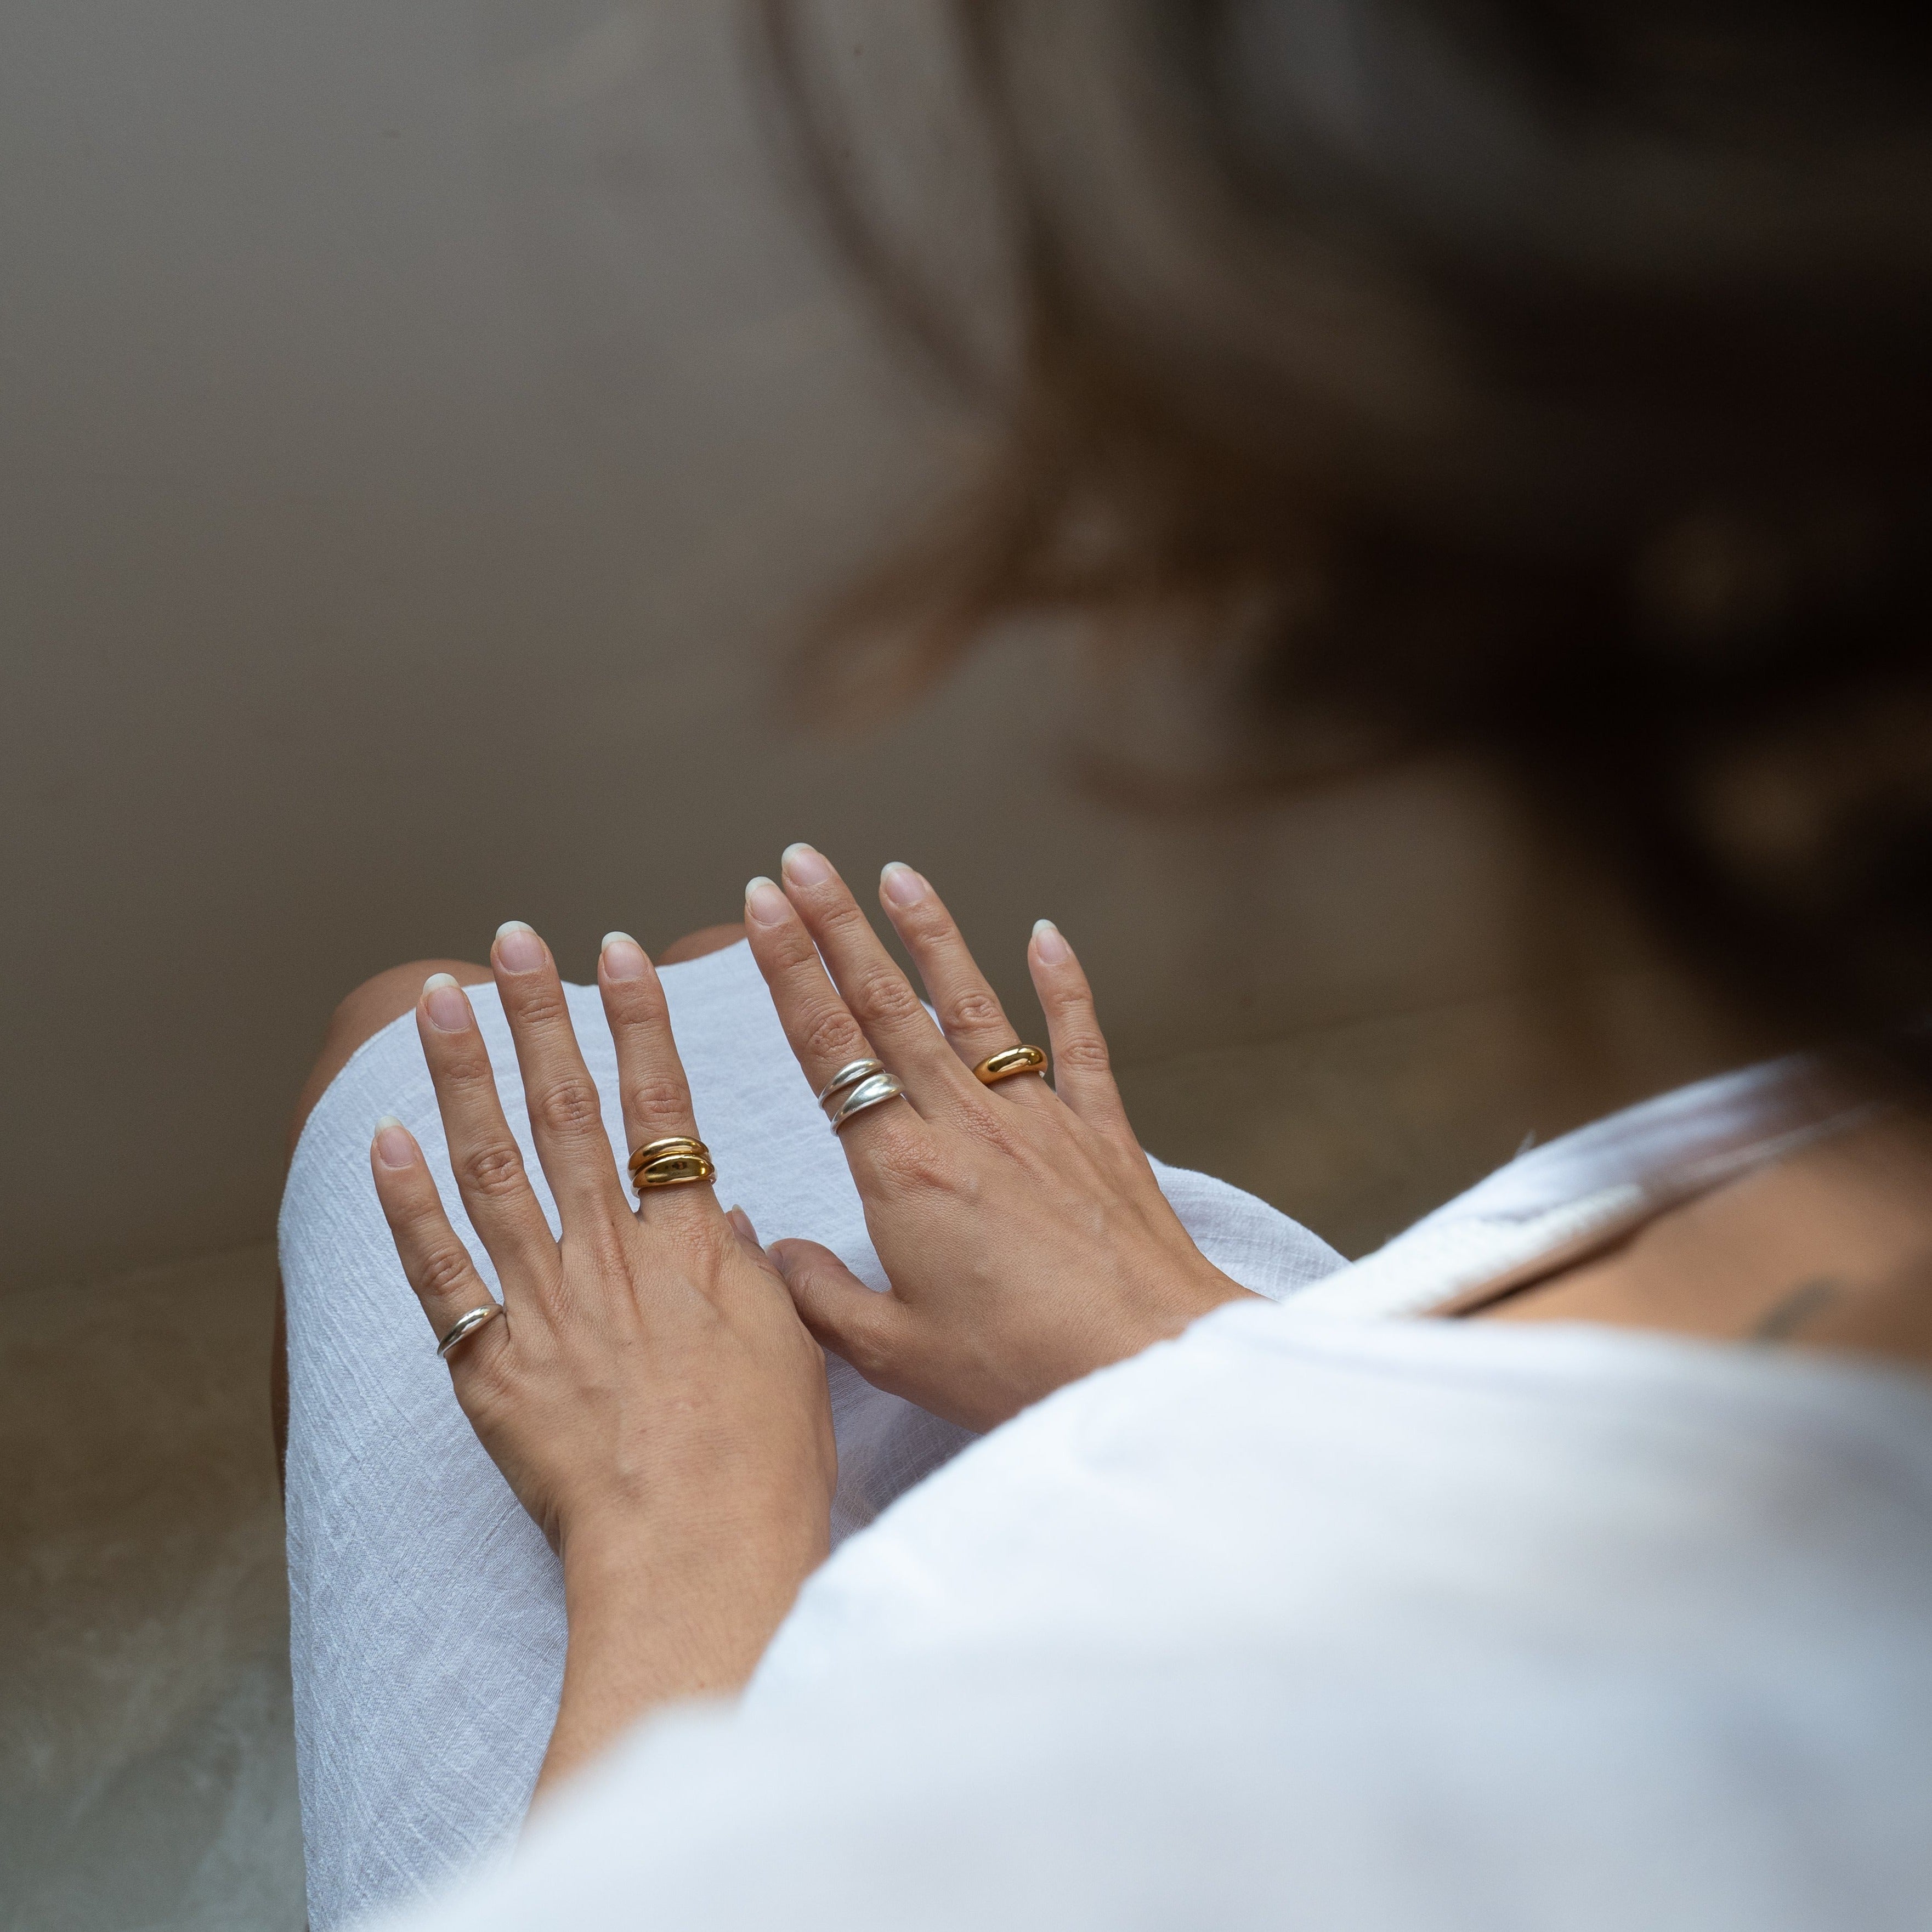 The petite Lea ring designed by MeganCollinsJewellery is an understated ring that embodies the power in every woman's spirit. 